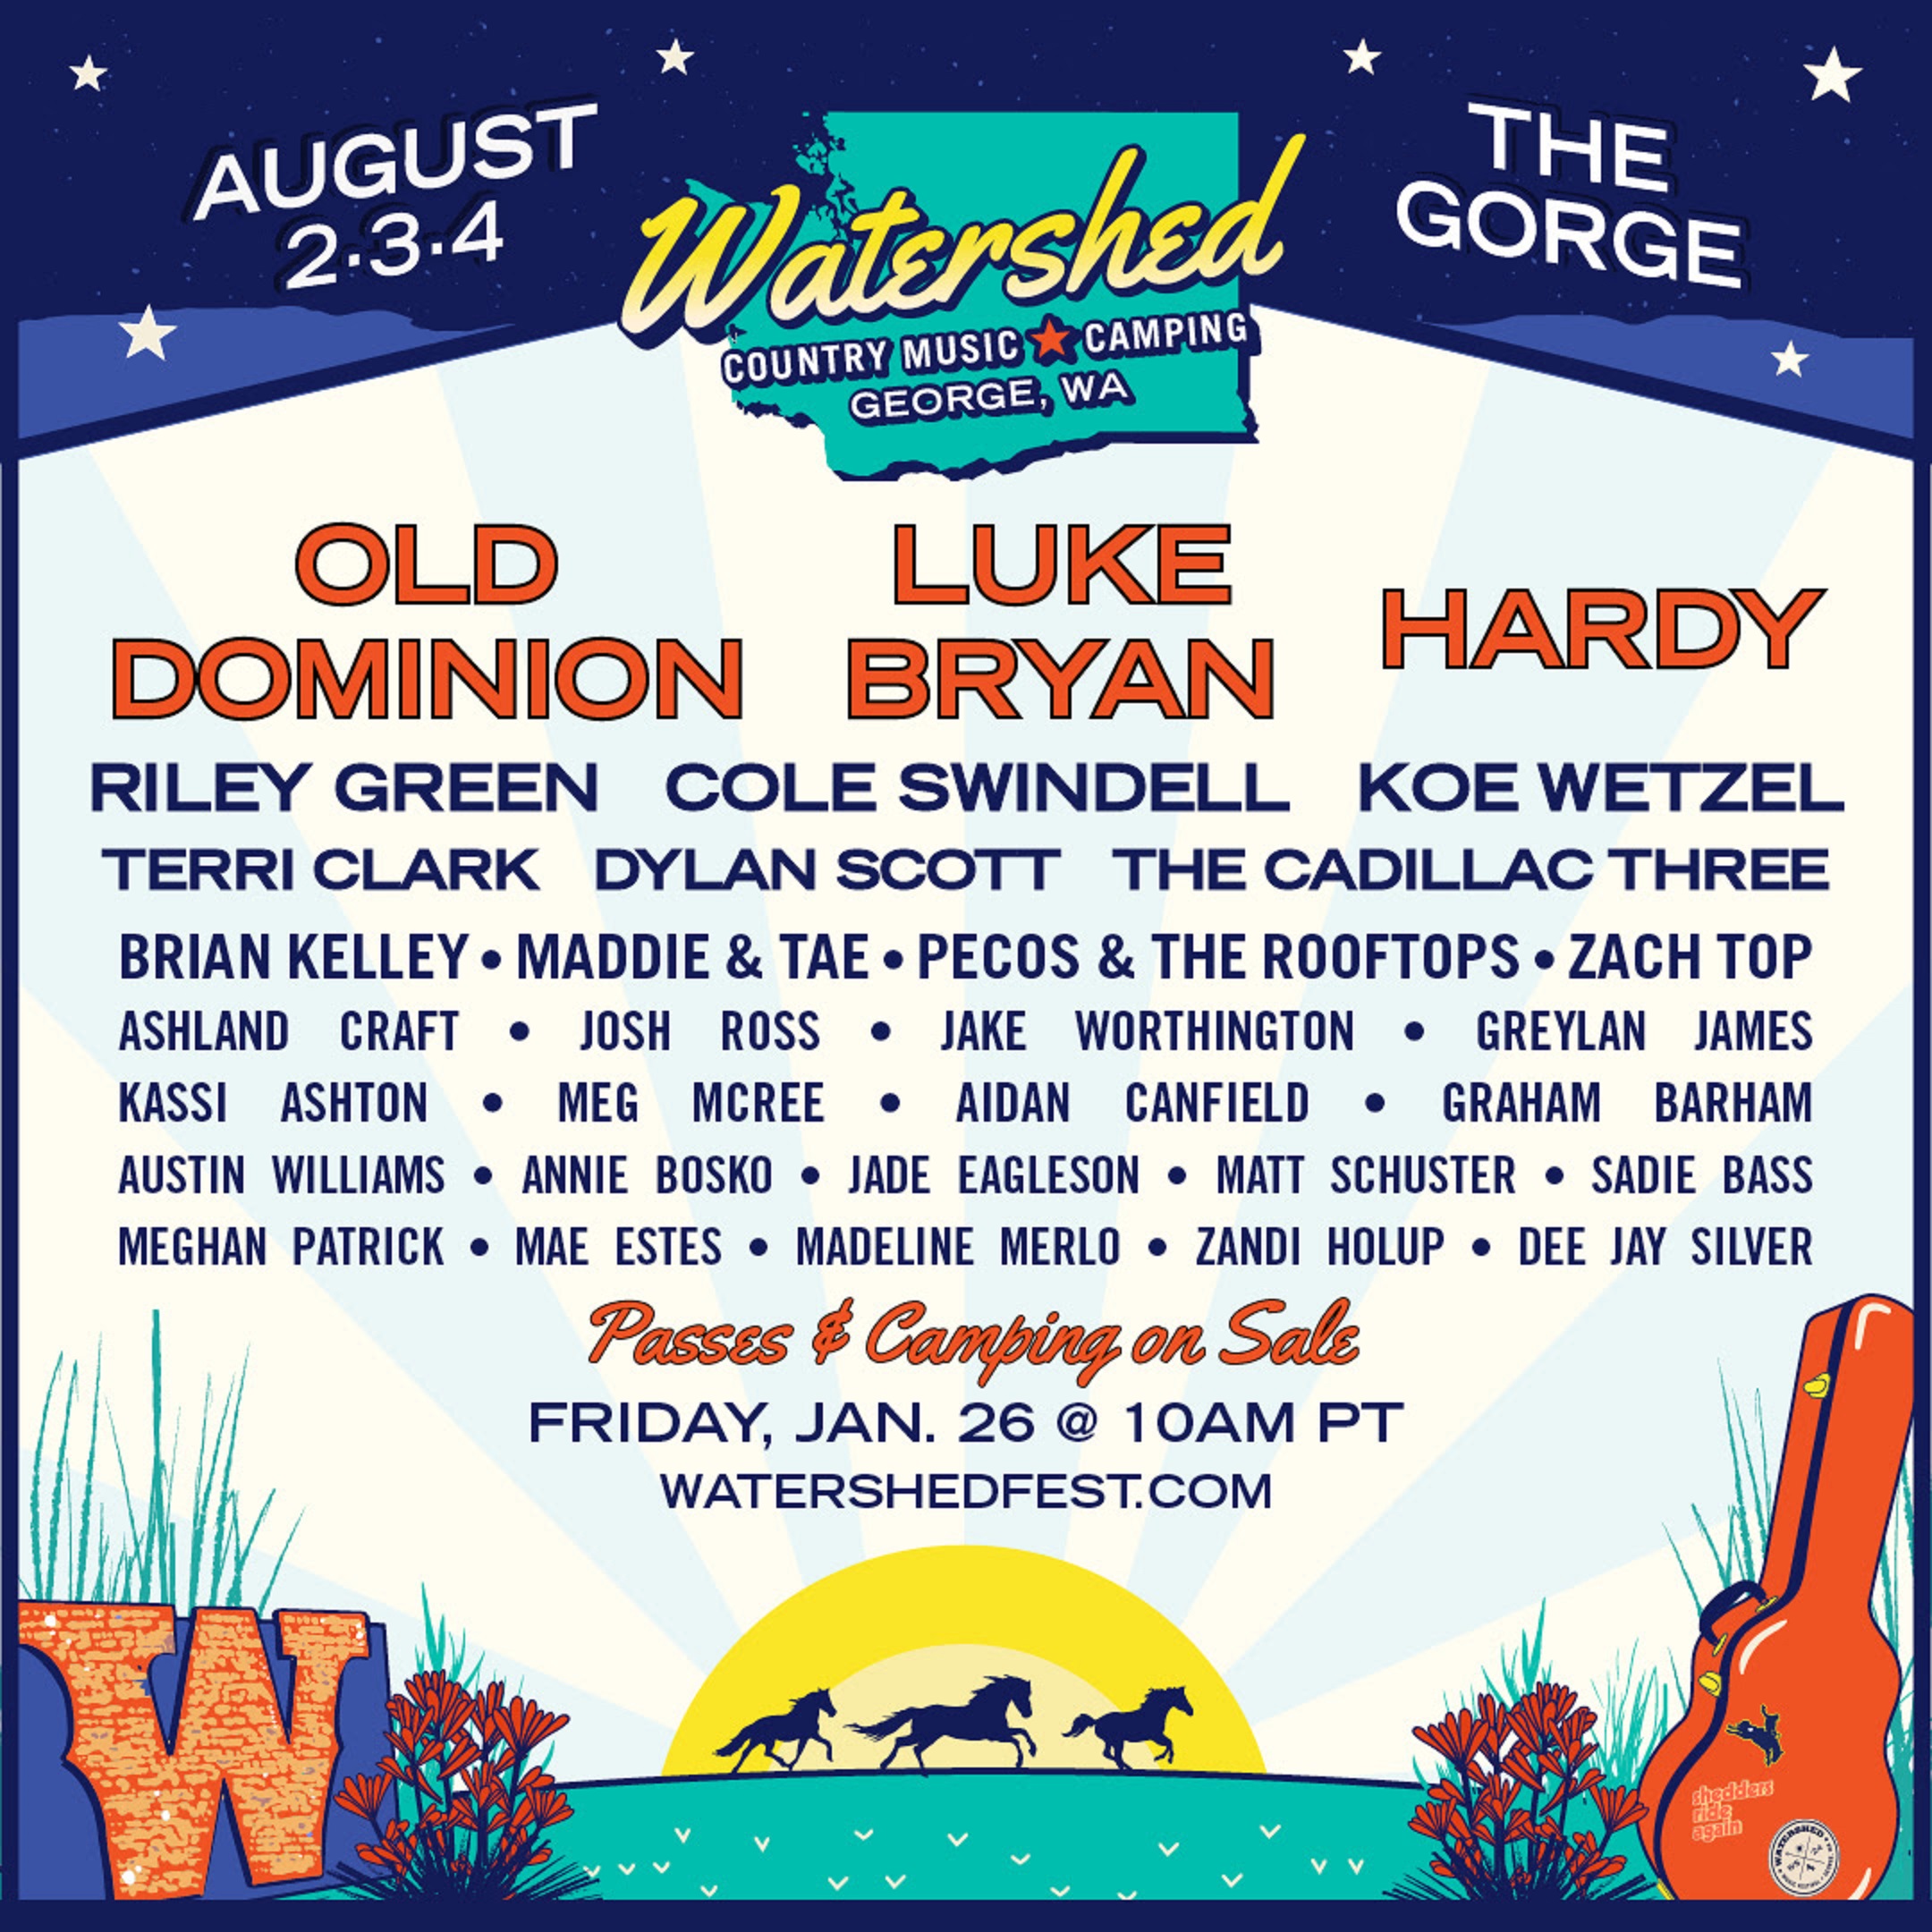 WATERSHED MUSIC FESTIVAL RETURNS TO THE SCENIC GORGE